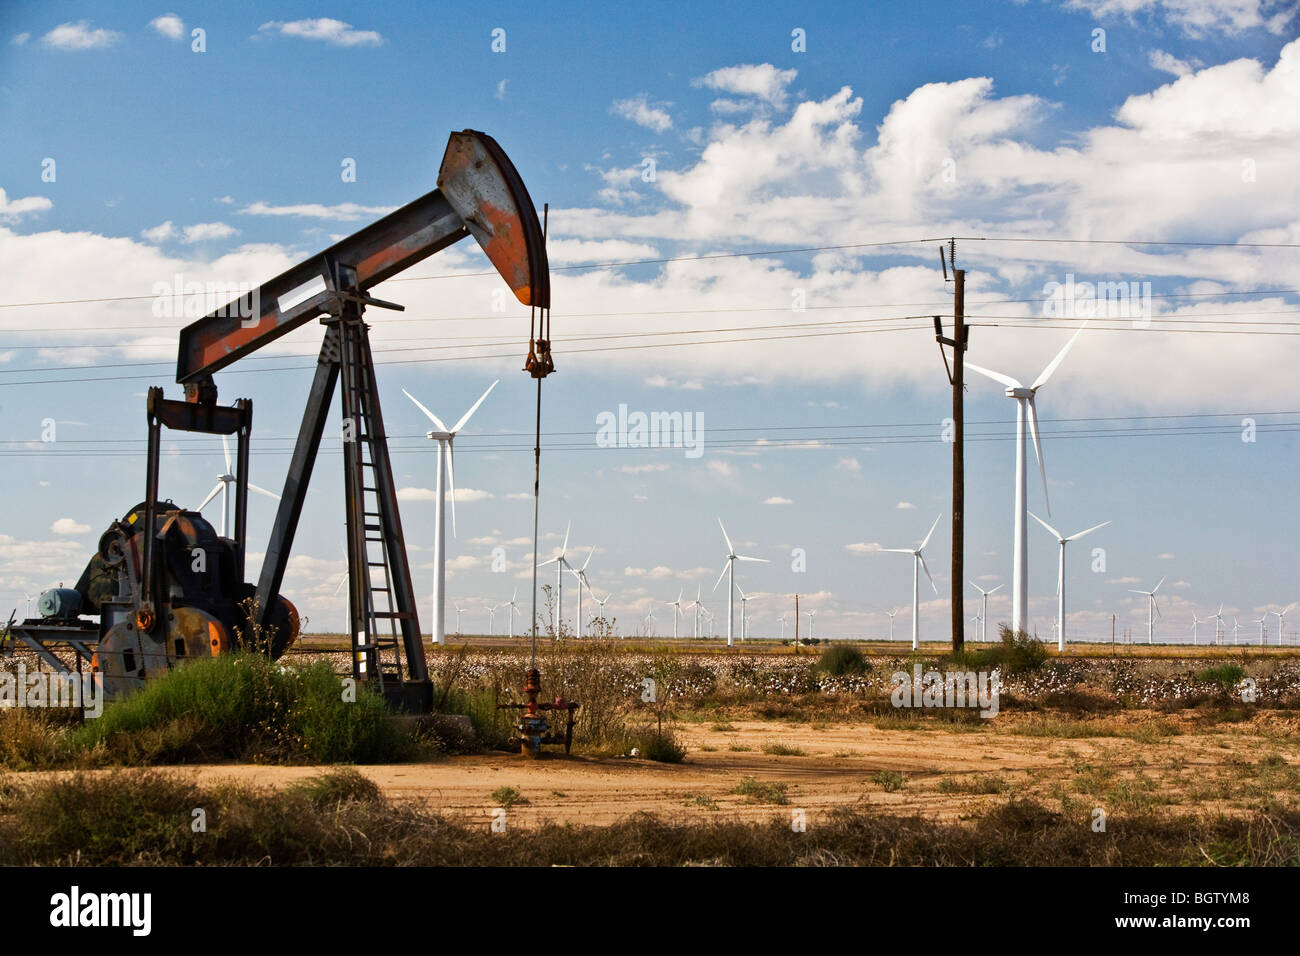 Old energy is still pulled from the earth, while new energy from the wind is harnessed in west Texas. Stock Photo